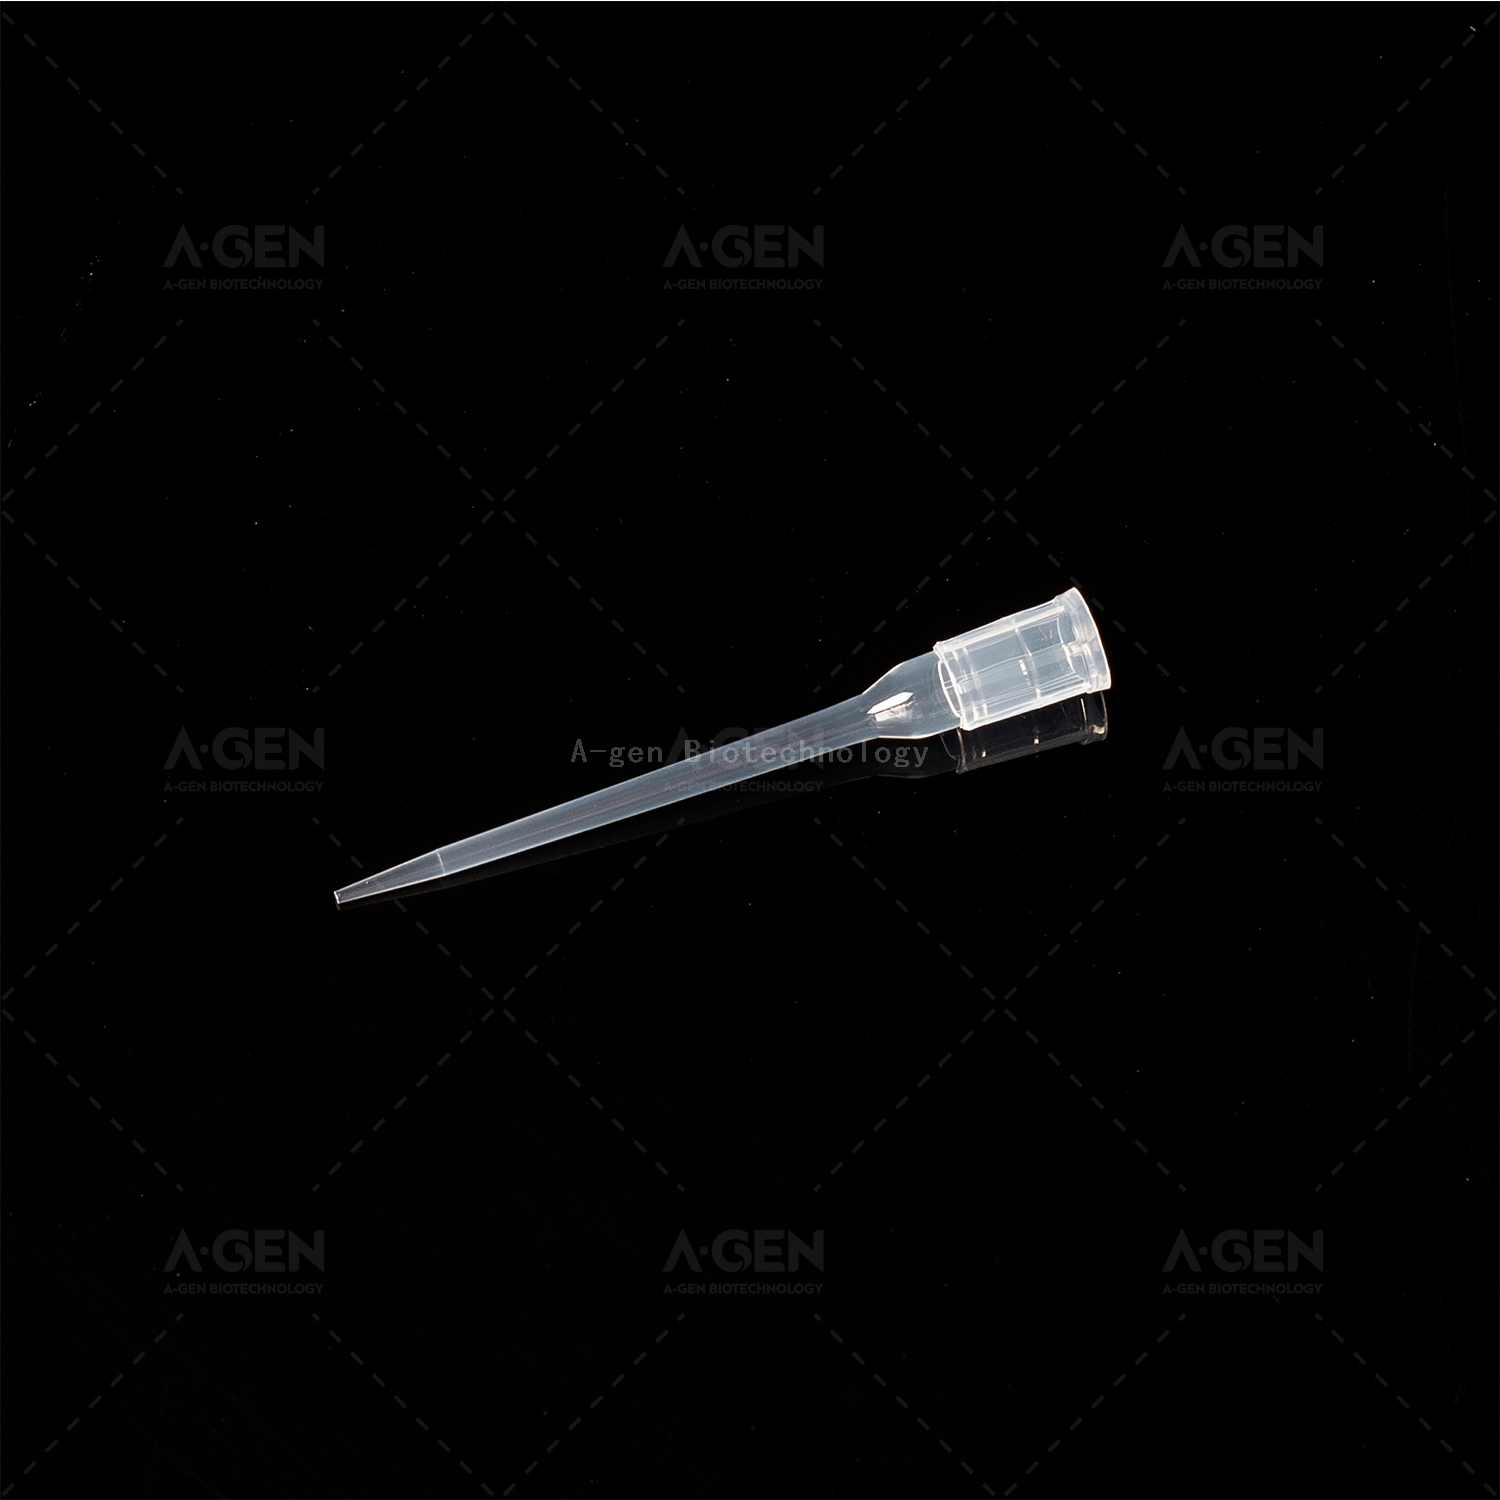 BECKMAN Tips 50μL Clear Robotic PP Pipette Tip (Racked,sterile) for DNA/RNA Extraction No Filter